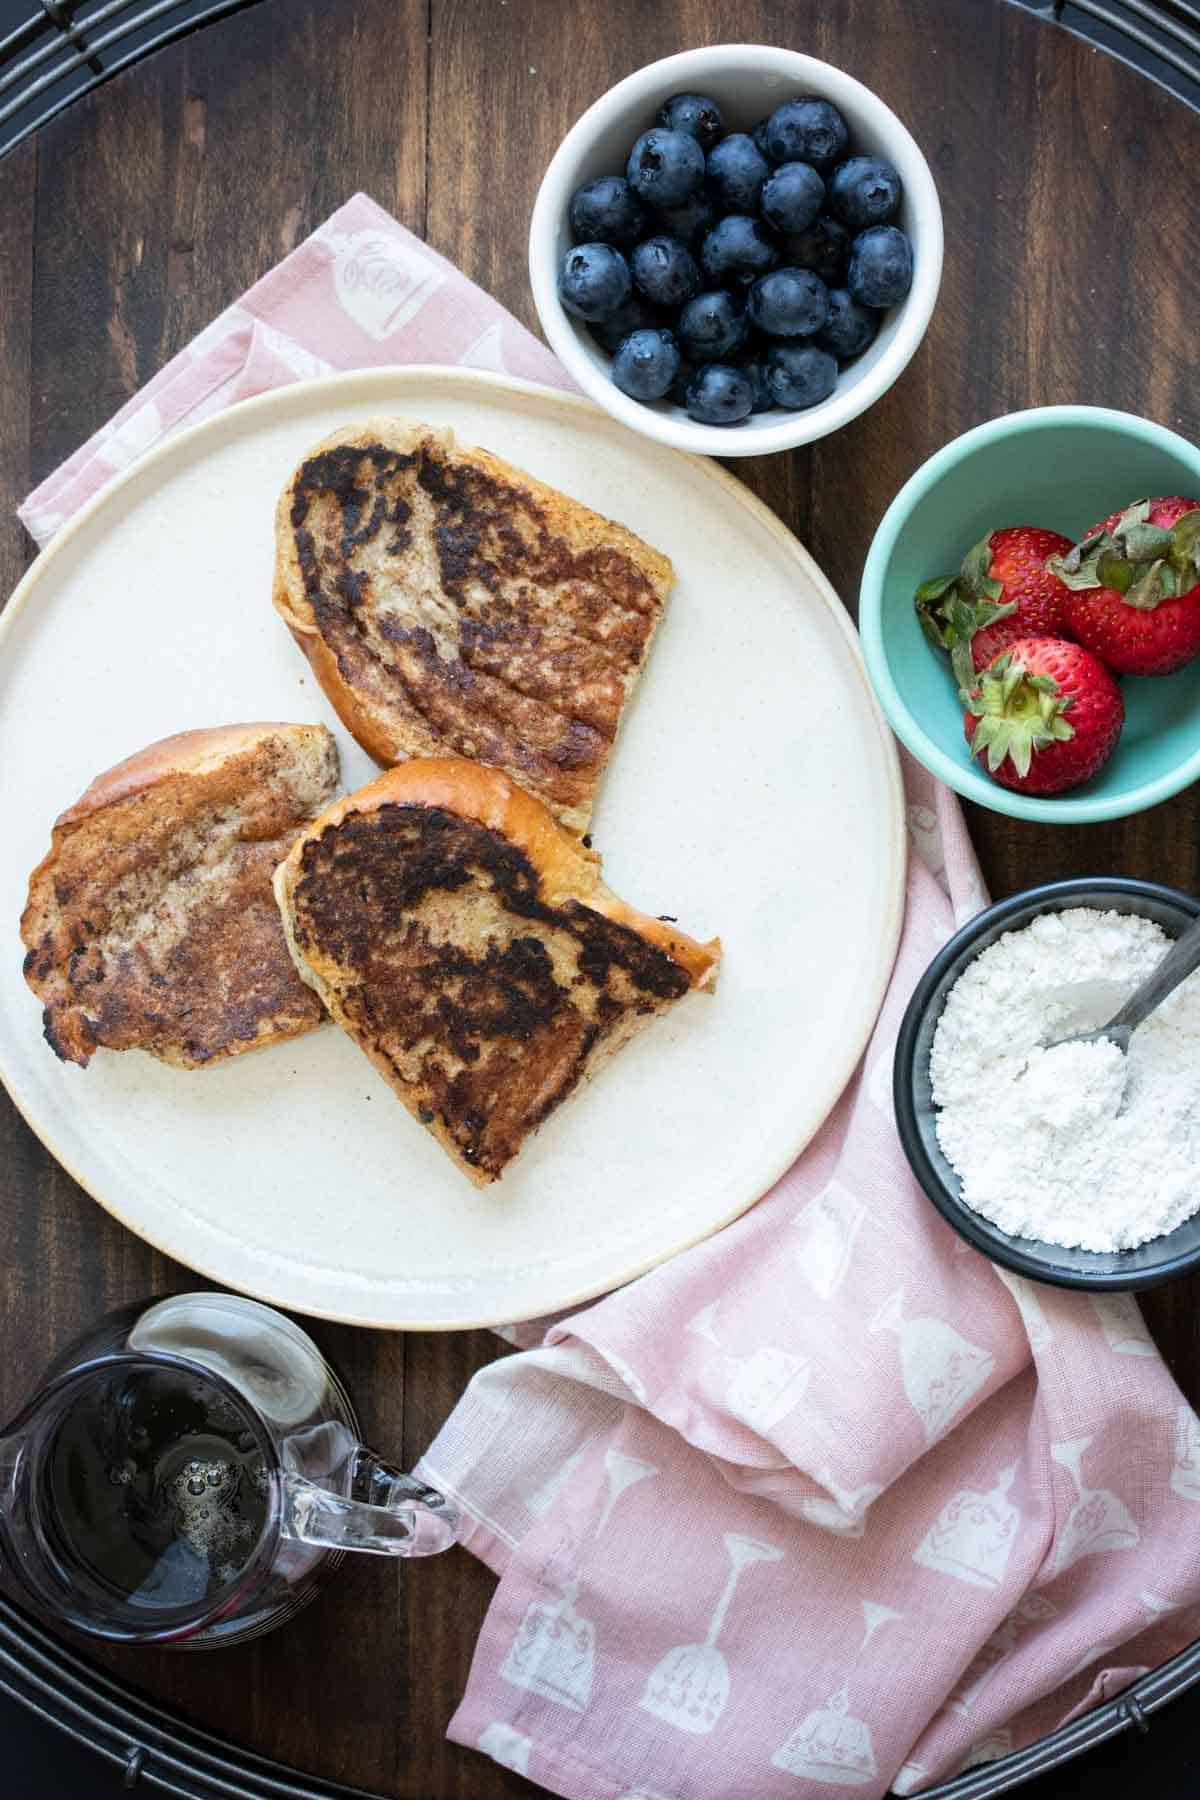 Three pieces of grilled French toast on a cream plate with bowls of toppings around it.